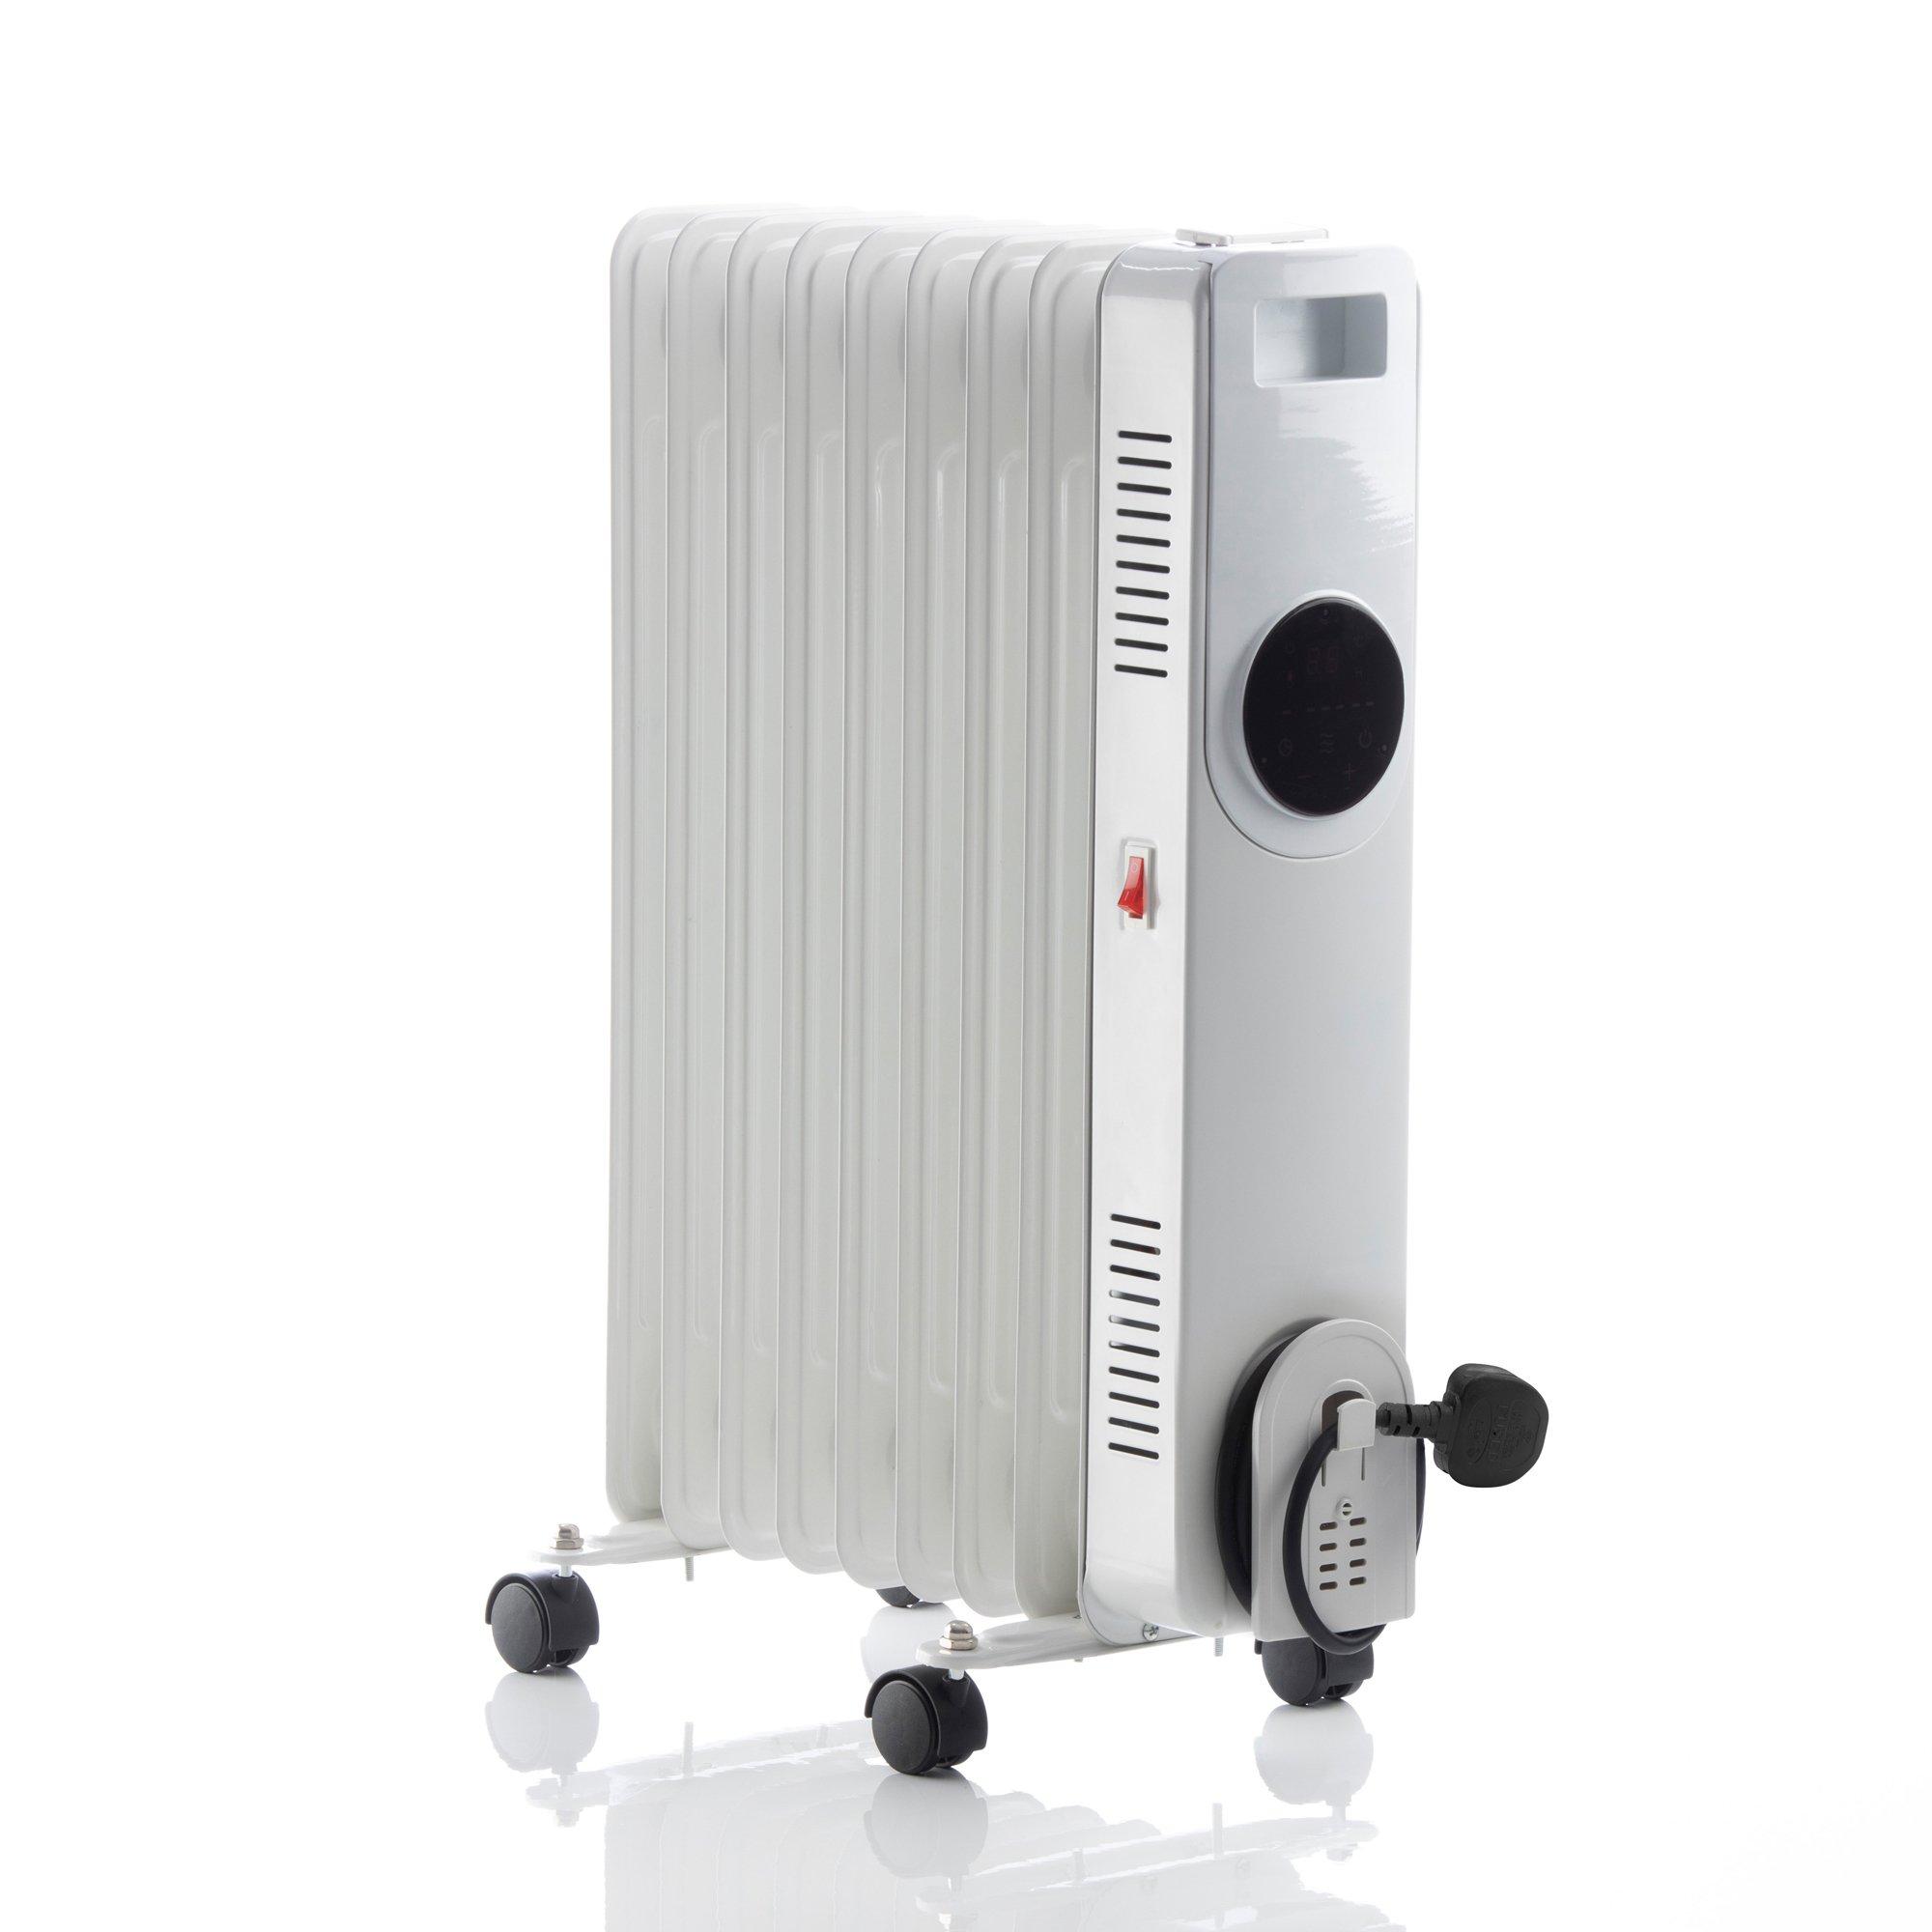 2000W Oil Filled Radiator 9 Fin Portable Heater With LCD and Remote Control White